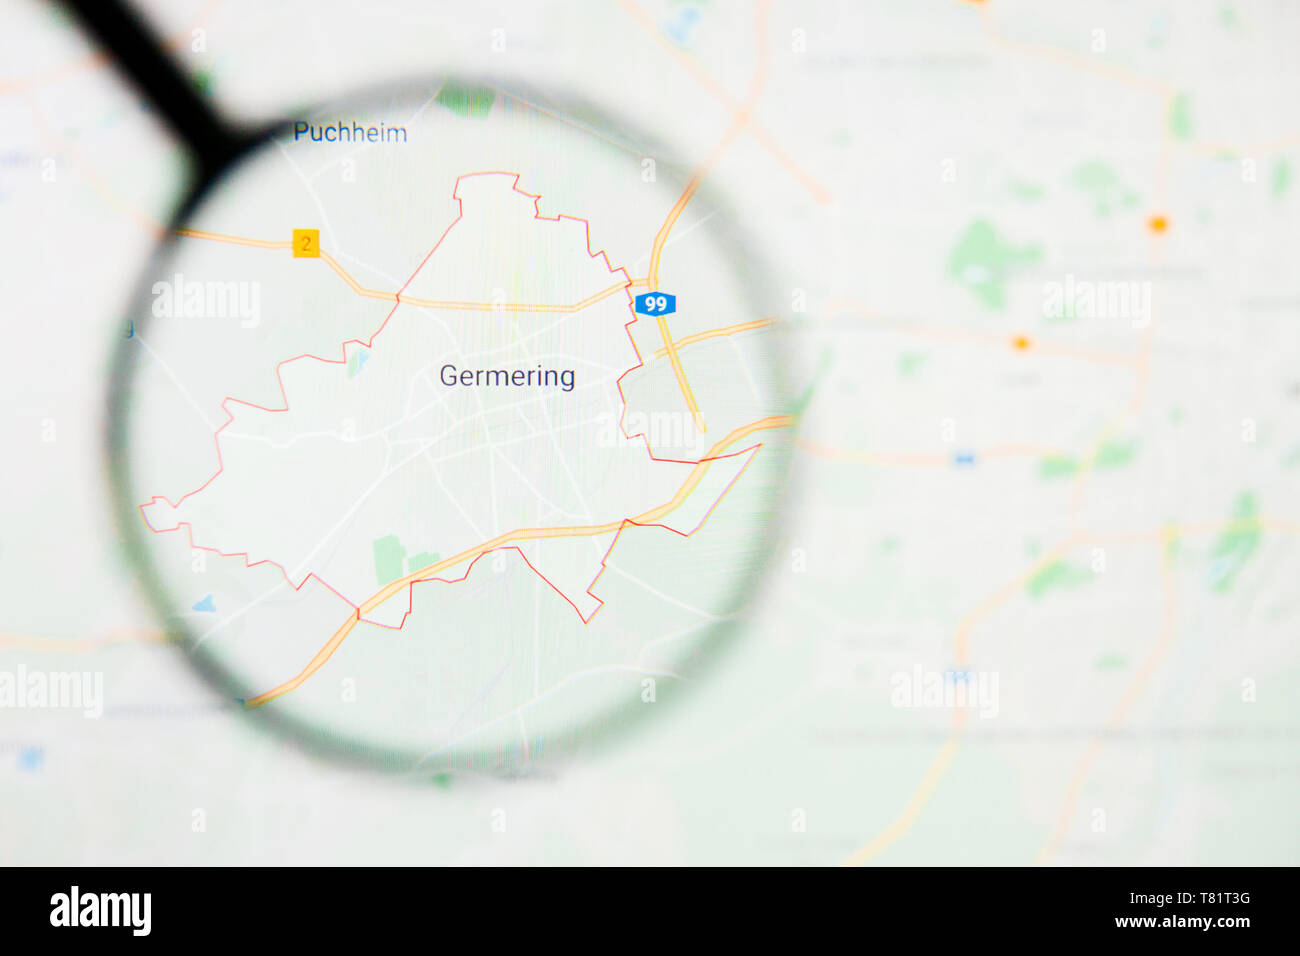 Germering city in Germany, Bavaria visualization illustrative concept on screen through magnifying glass Stock Photo